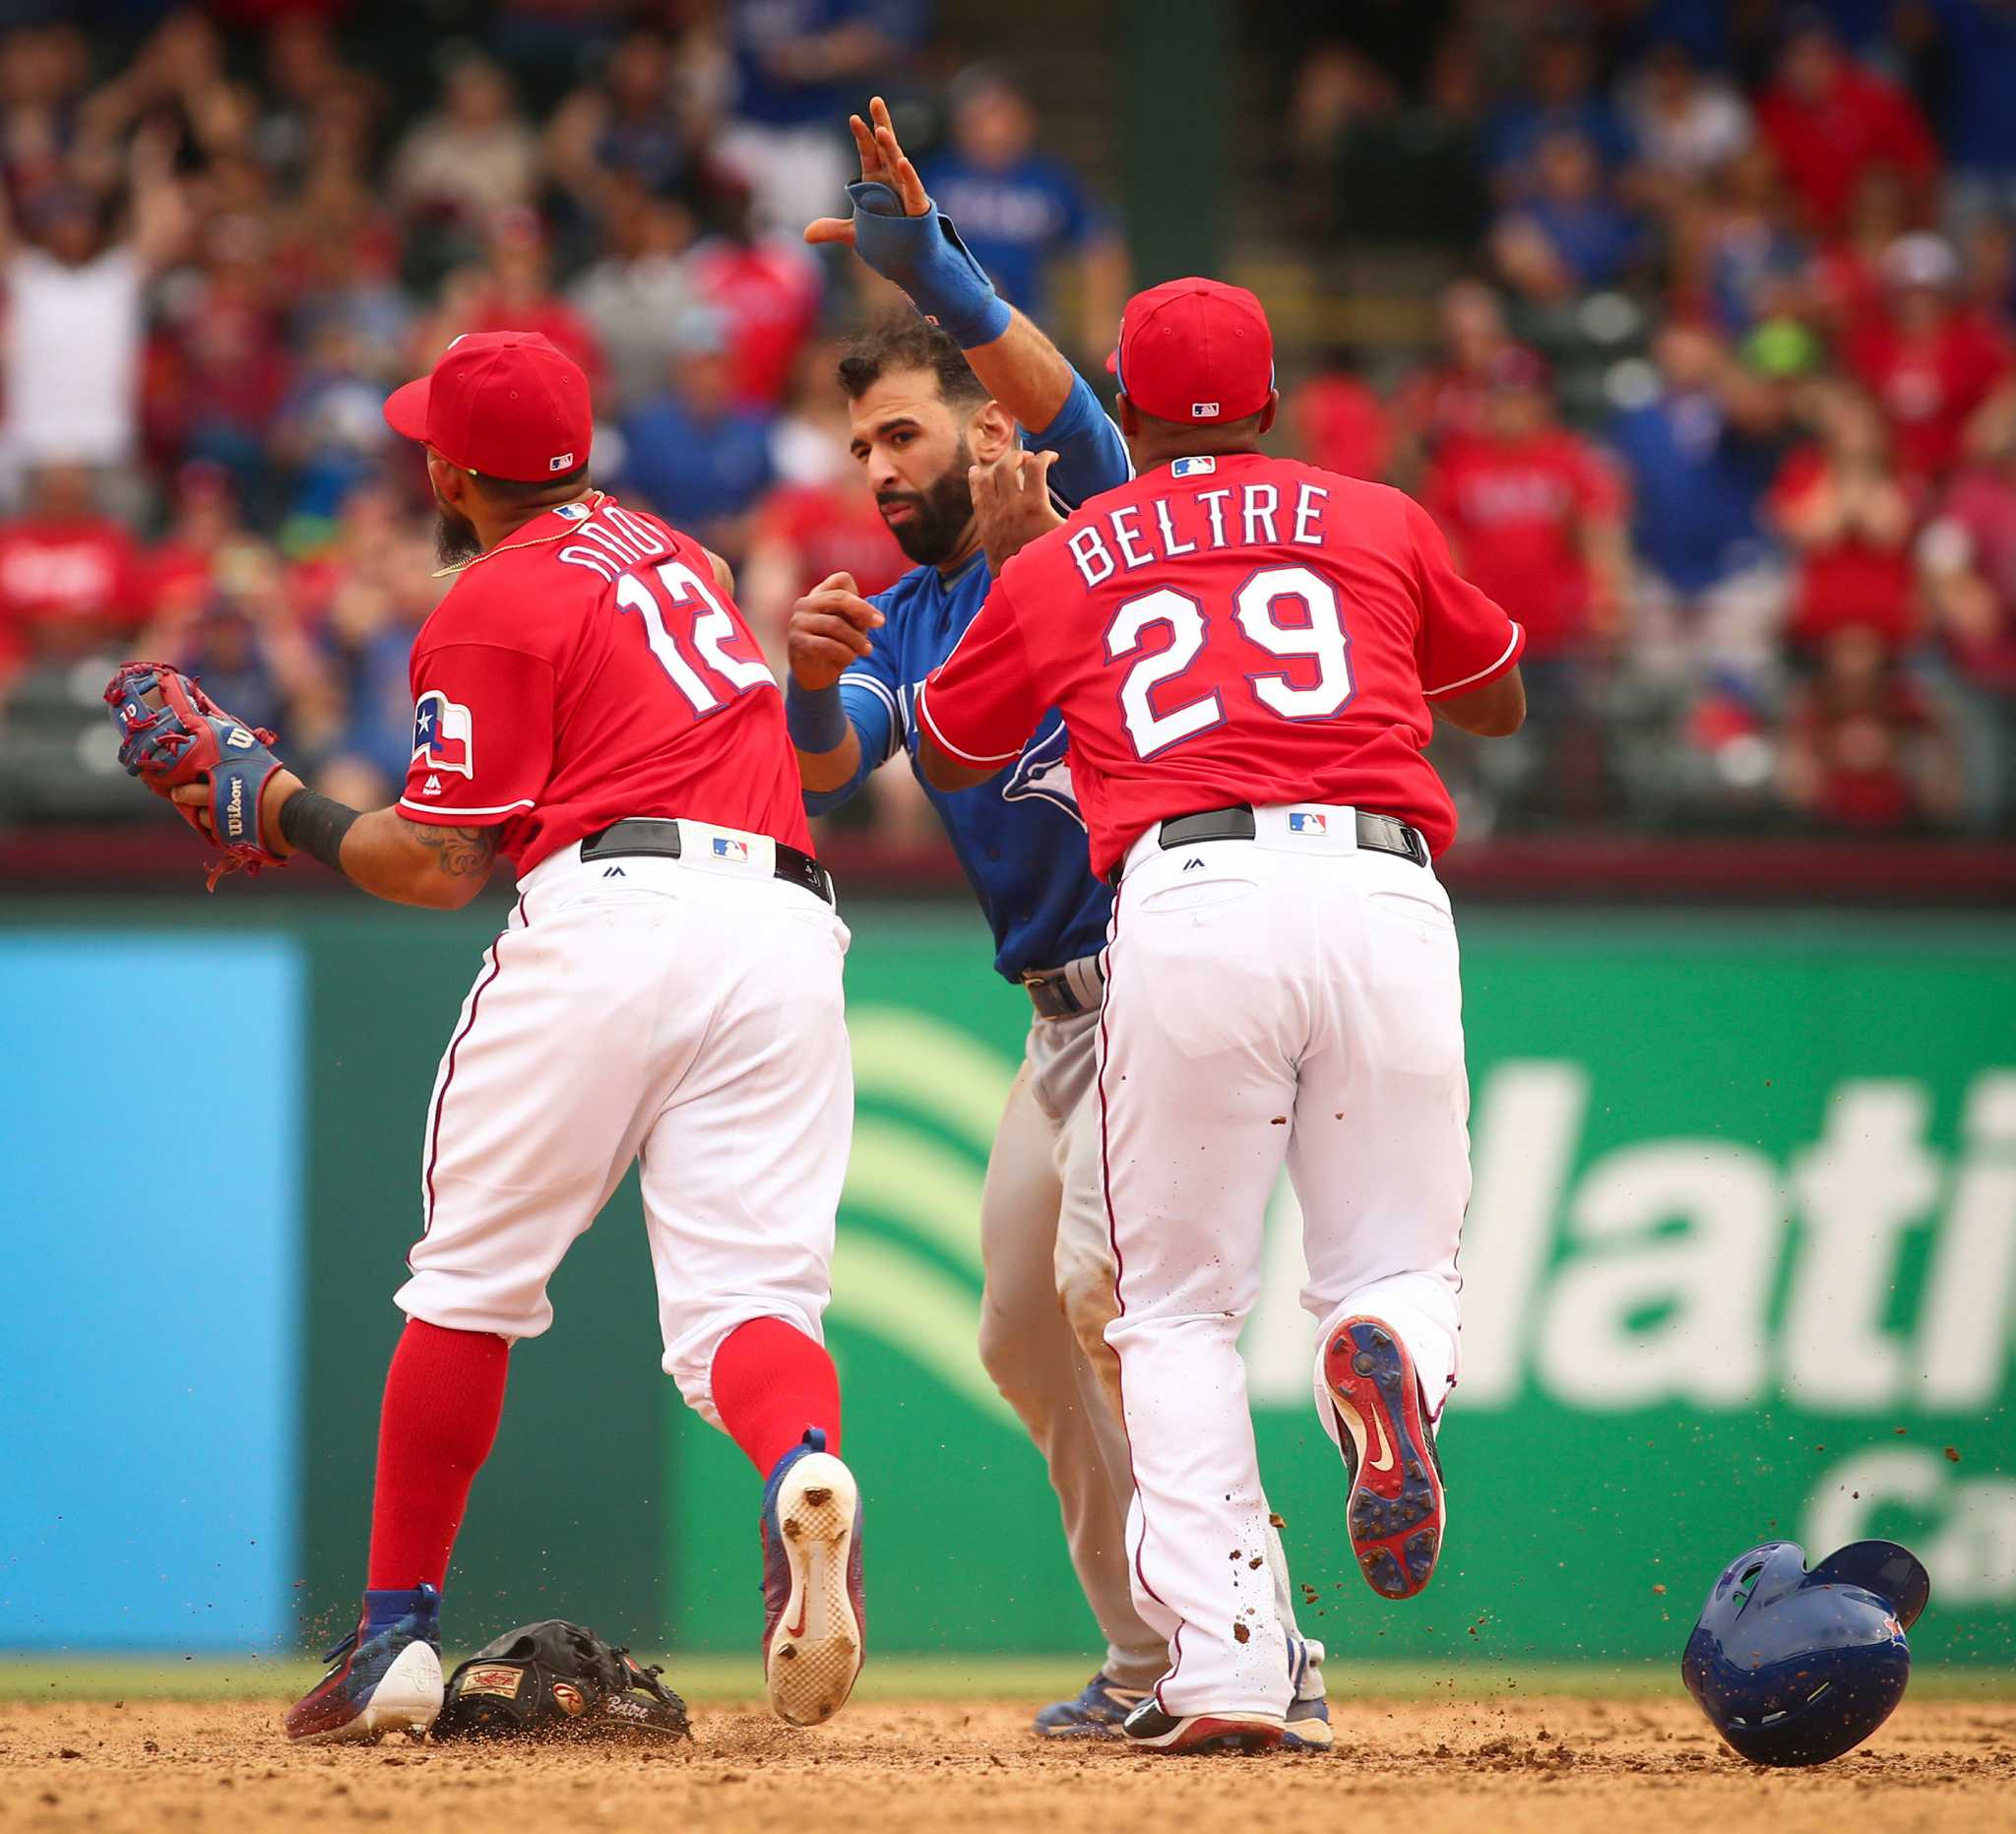 WATCH: Elvis Andrus and Rougned Odor Argue in the Match Against